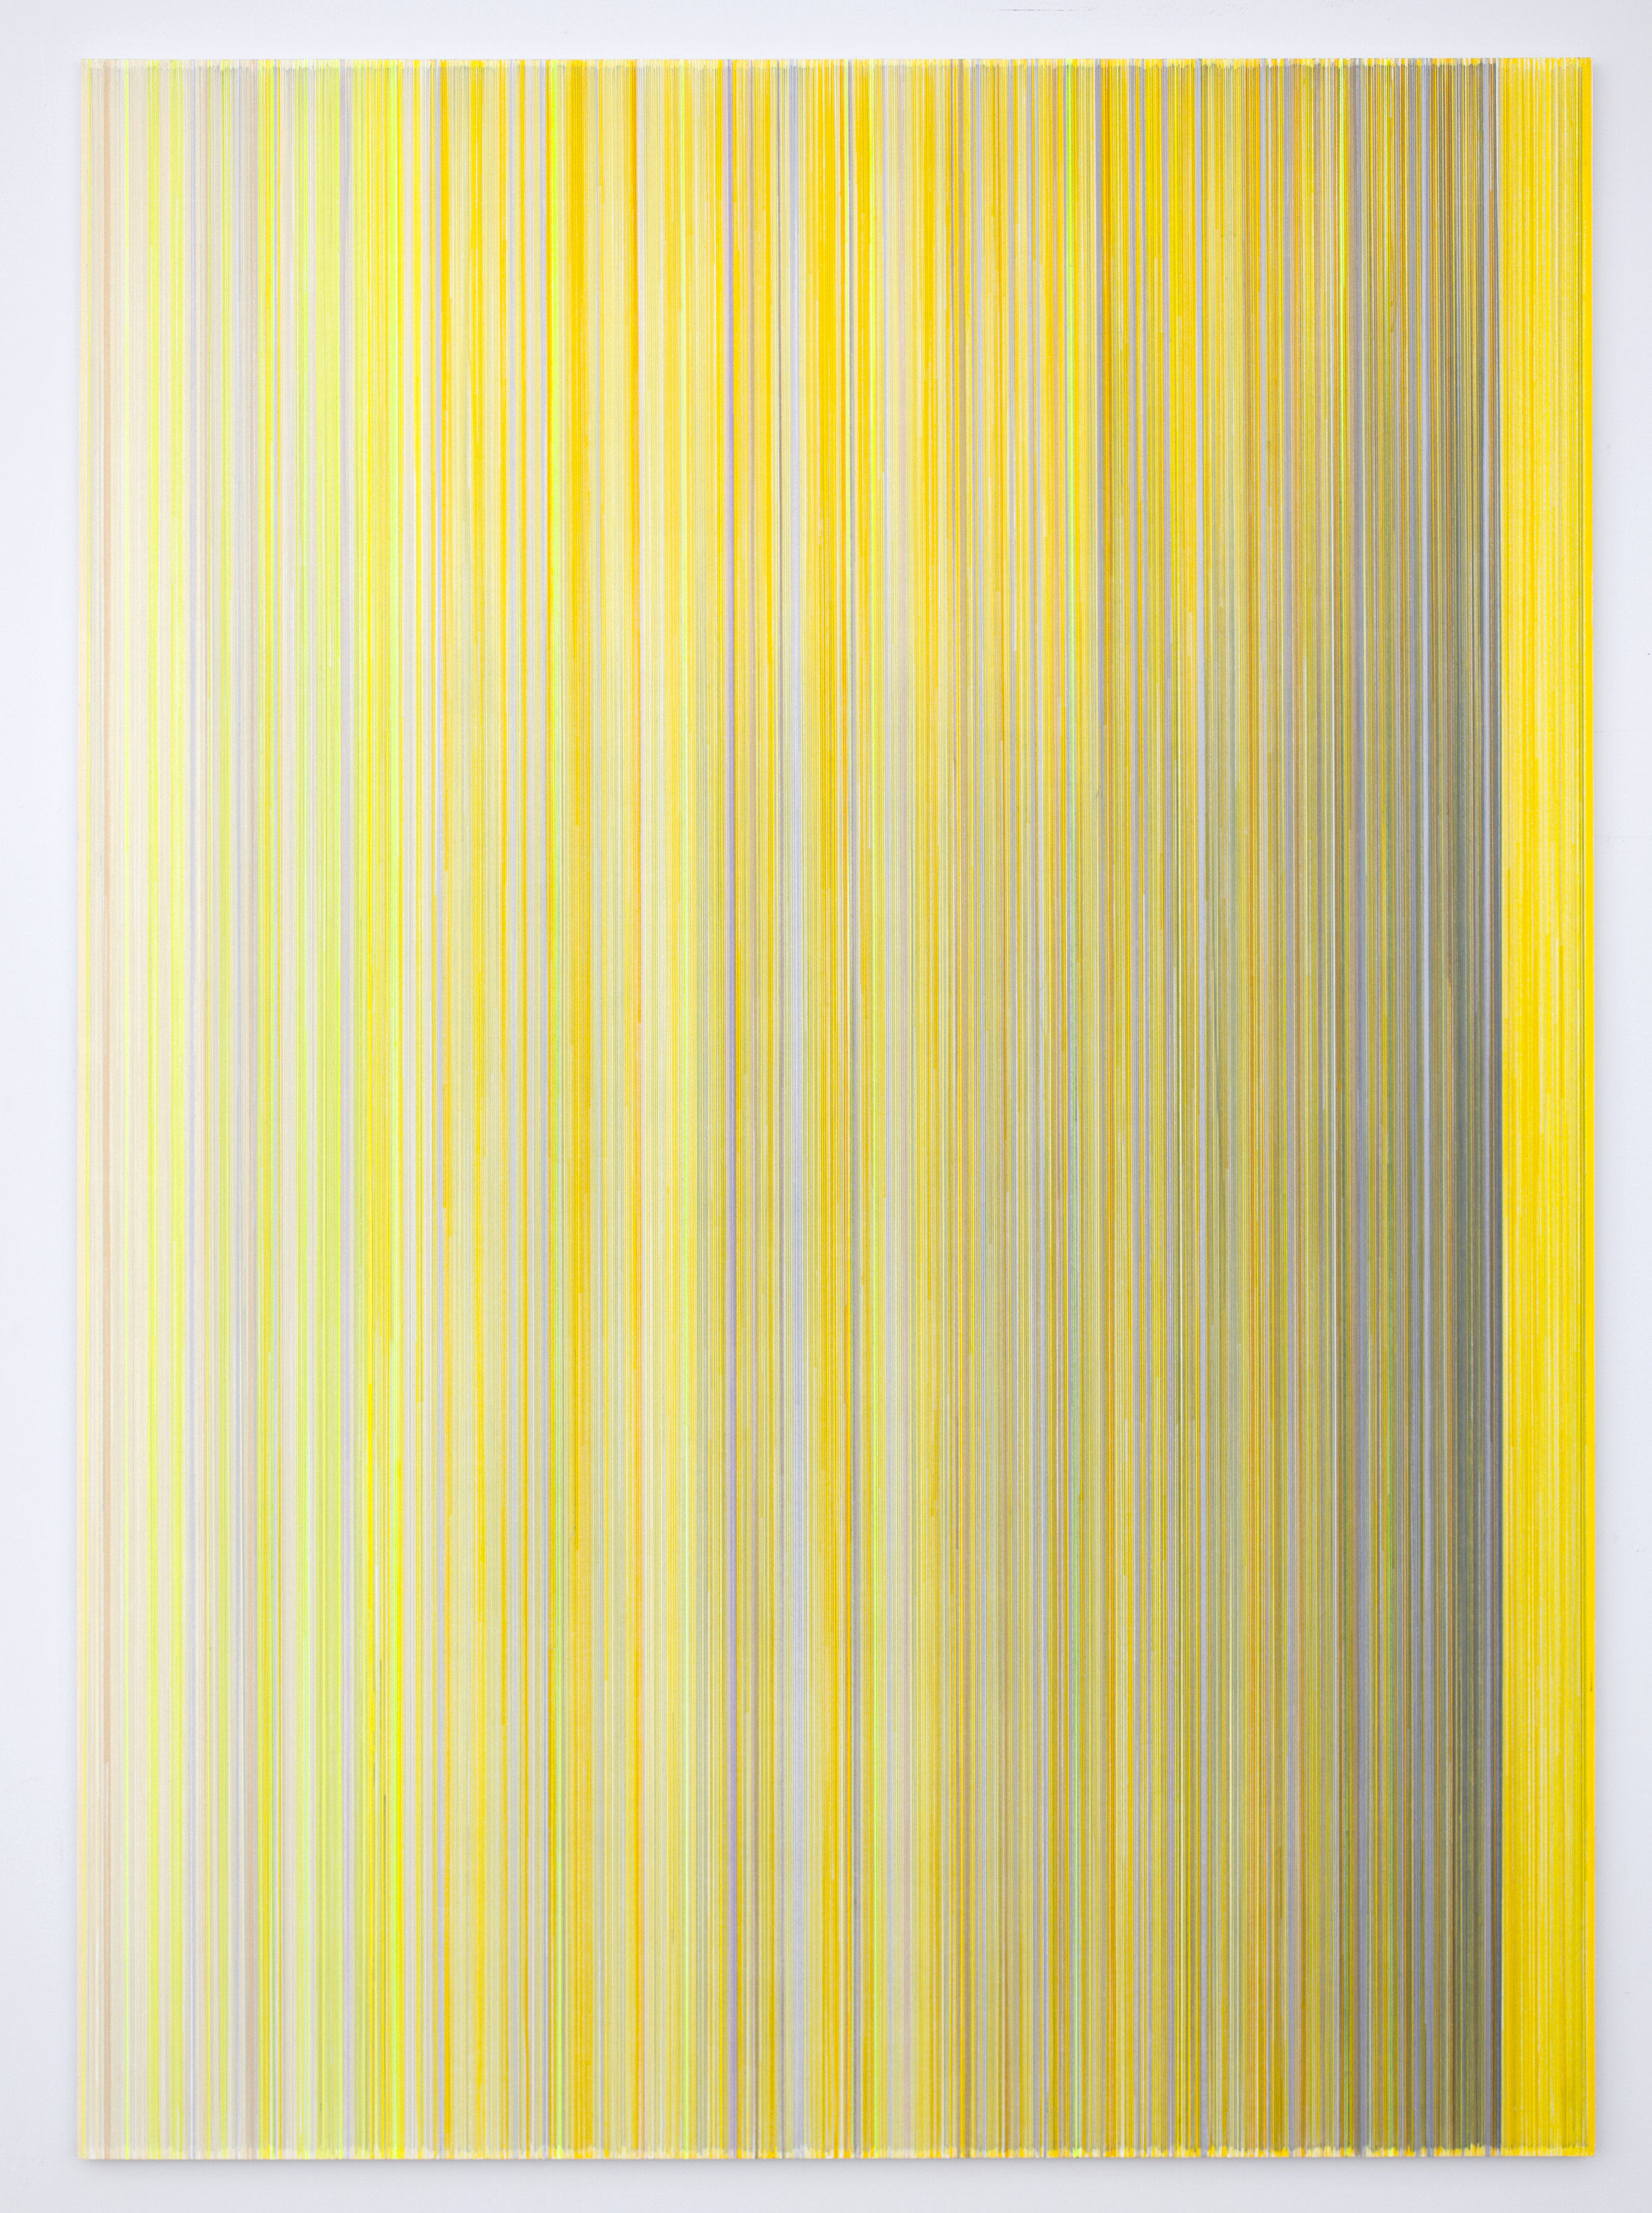    sound I saw   2018 graphite and colored pencil on mat board 70 x 50 inches title from Teju Cole’s poem  Brienzersee,  published in  Blind Spot , page 120 